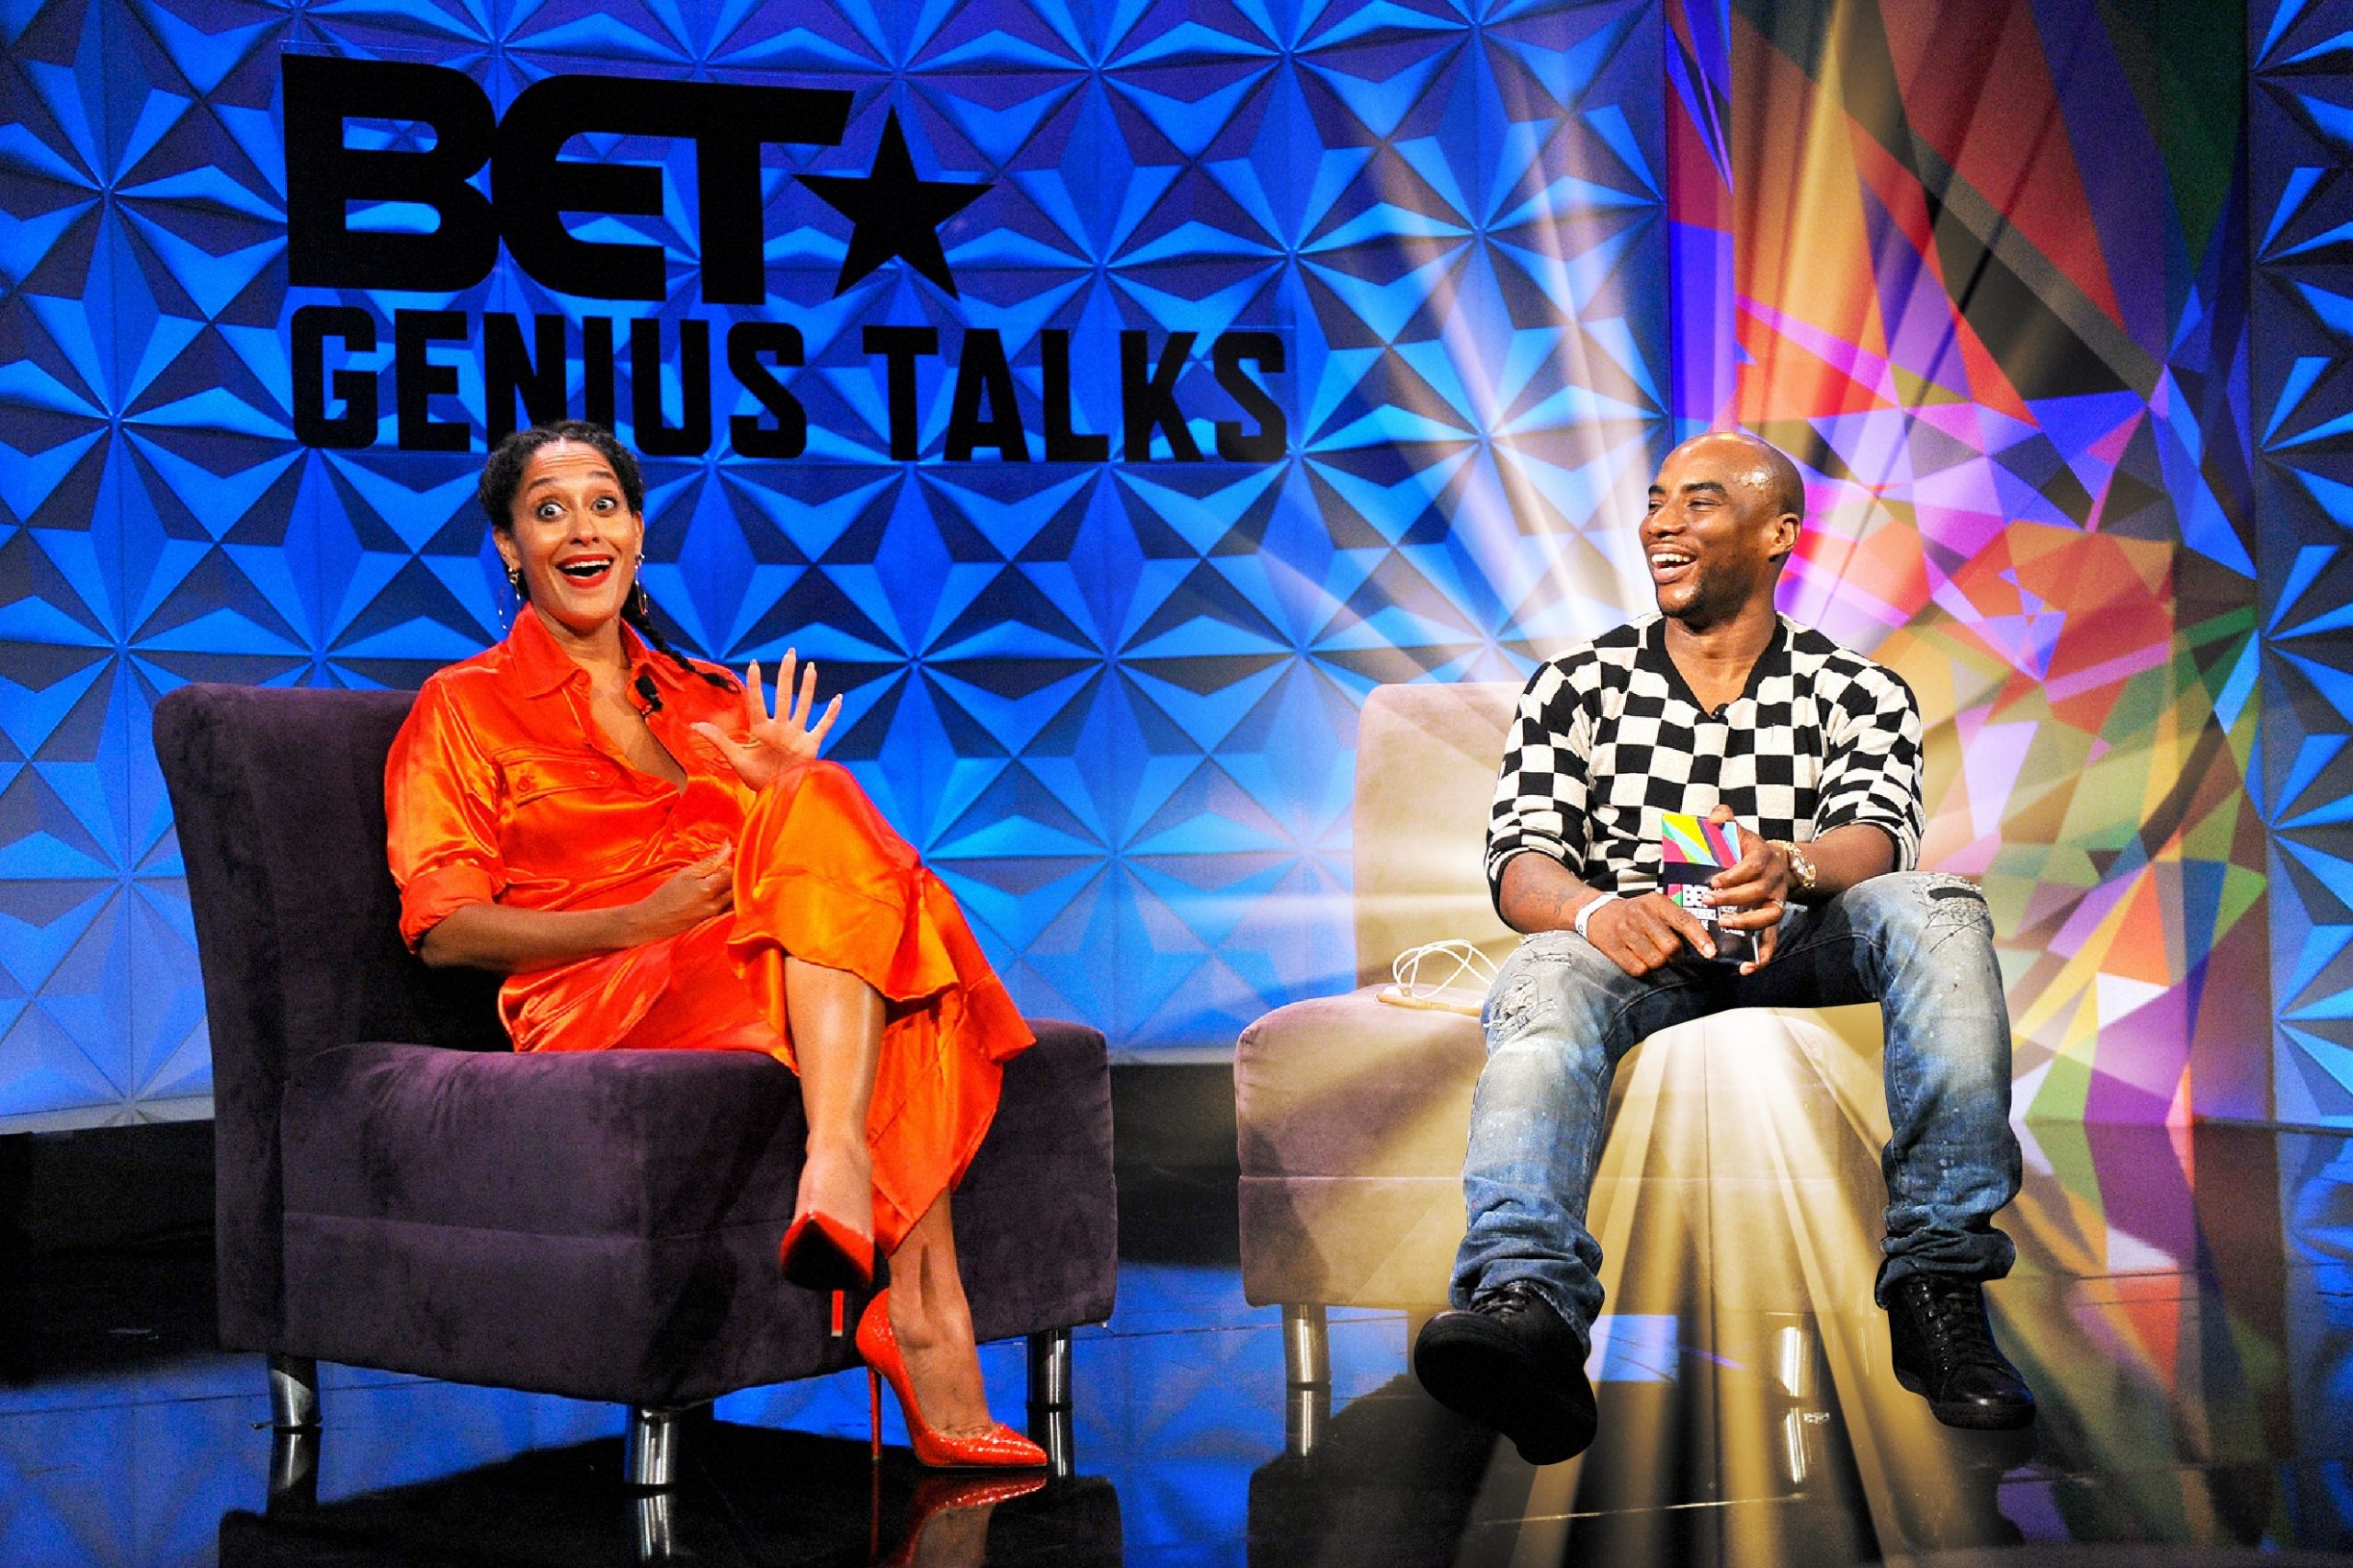 Charlamagne Tha God interviewing Tracee Ellis Ross with a golden light radiating from behind Charlamagne.